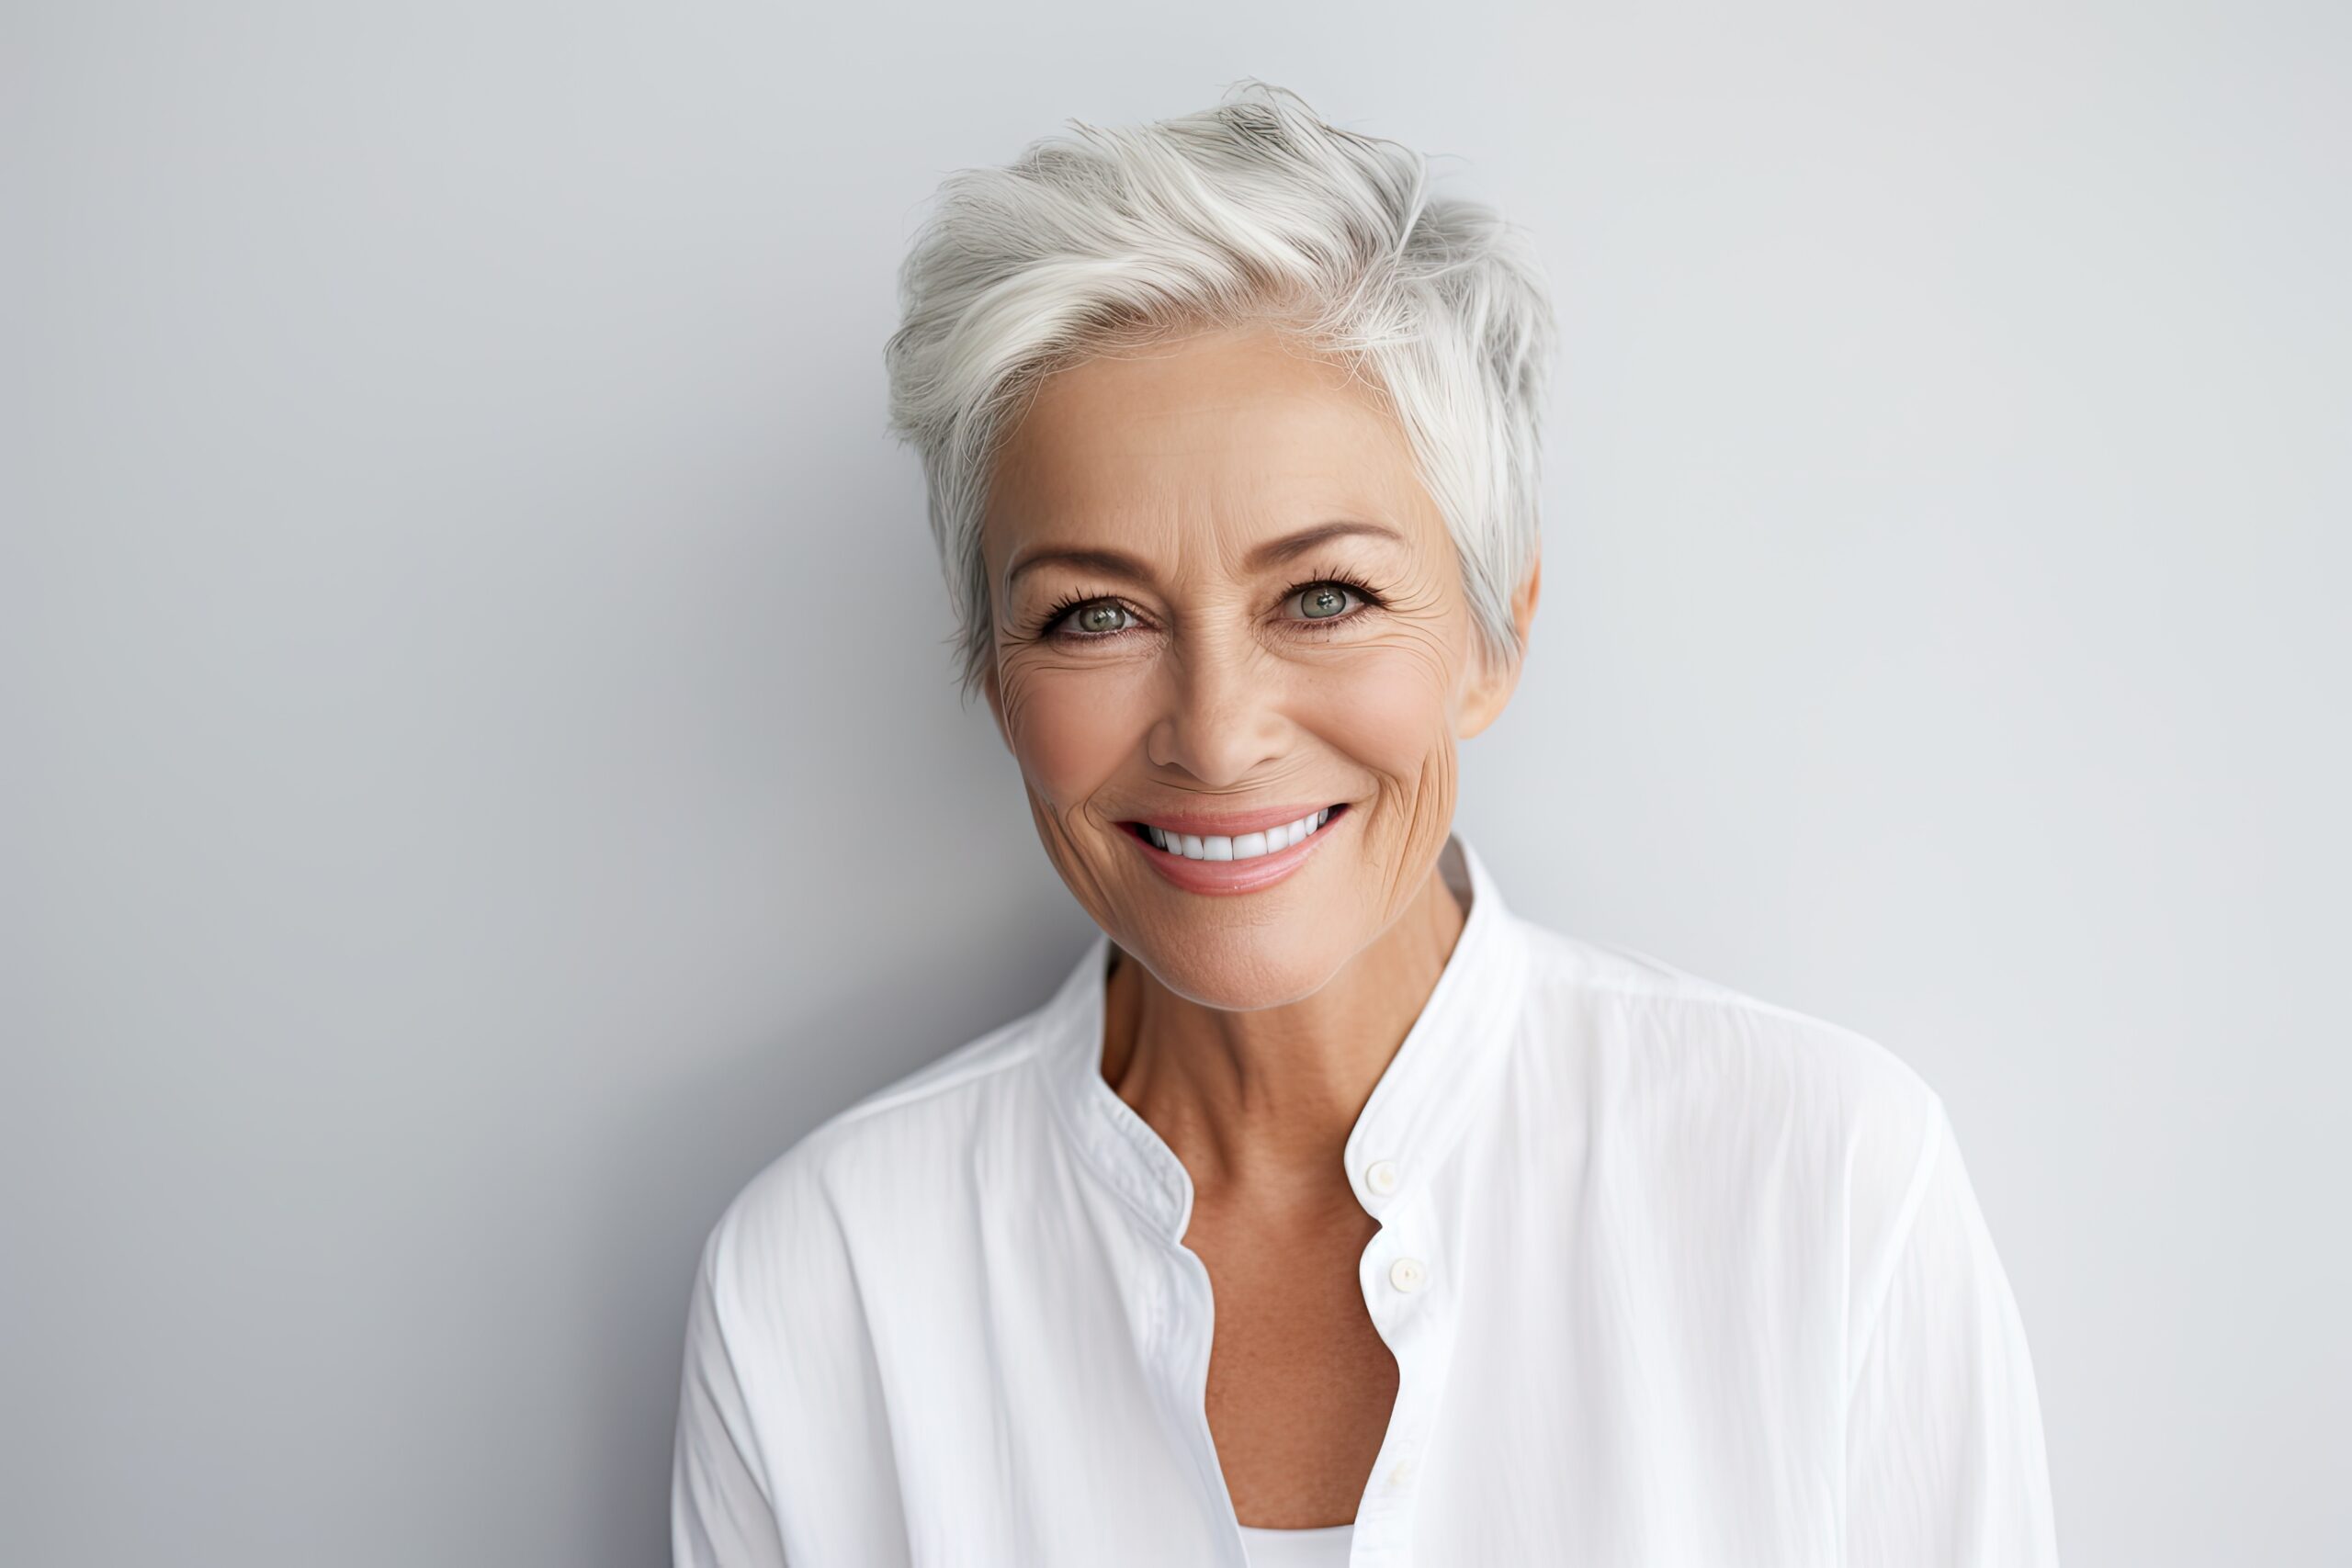 Middle-aged woman smiling with white hair